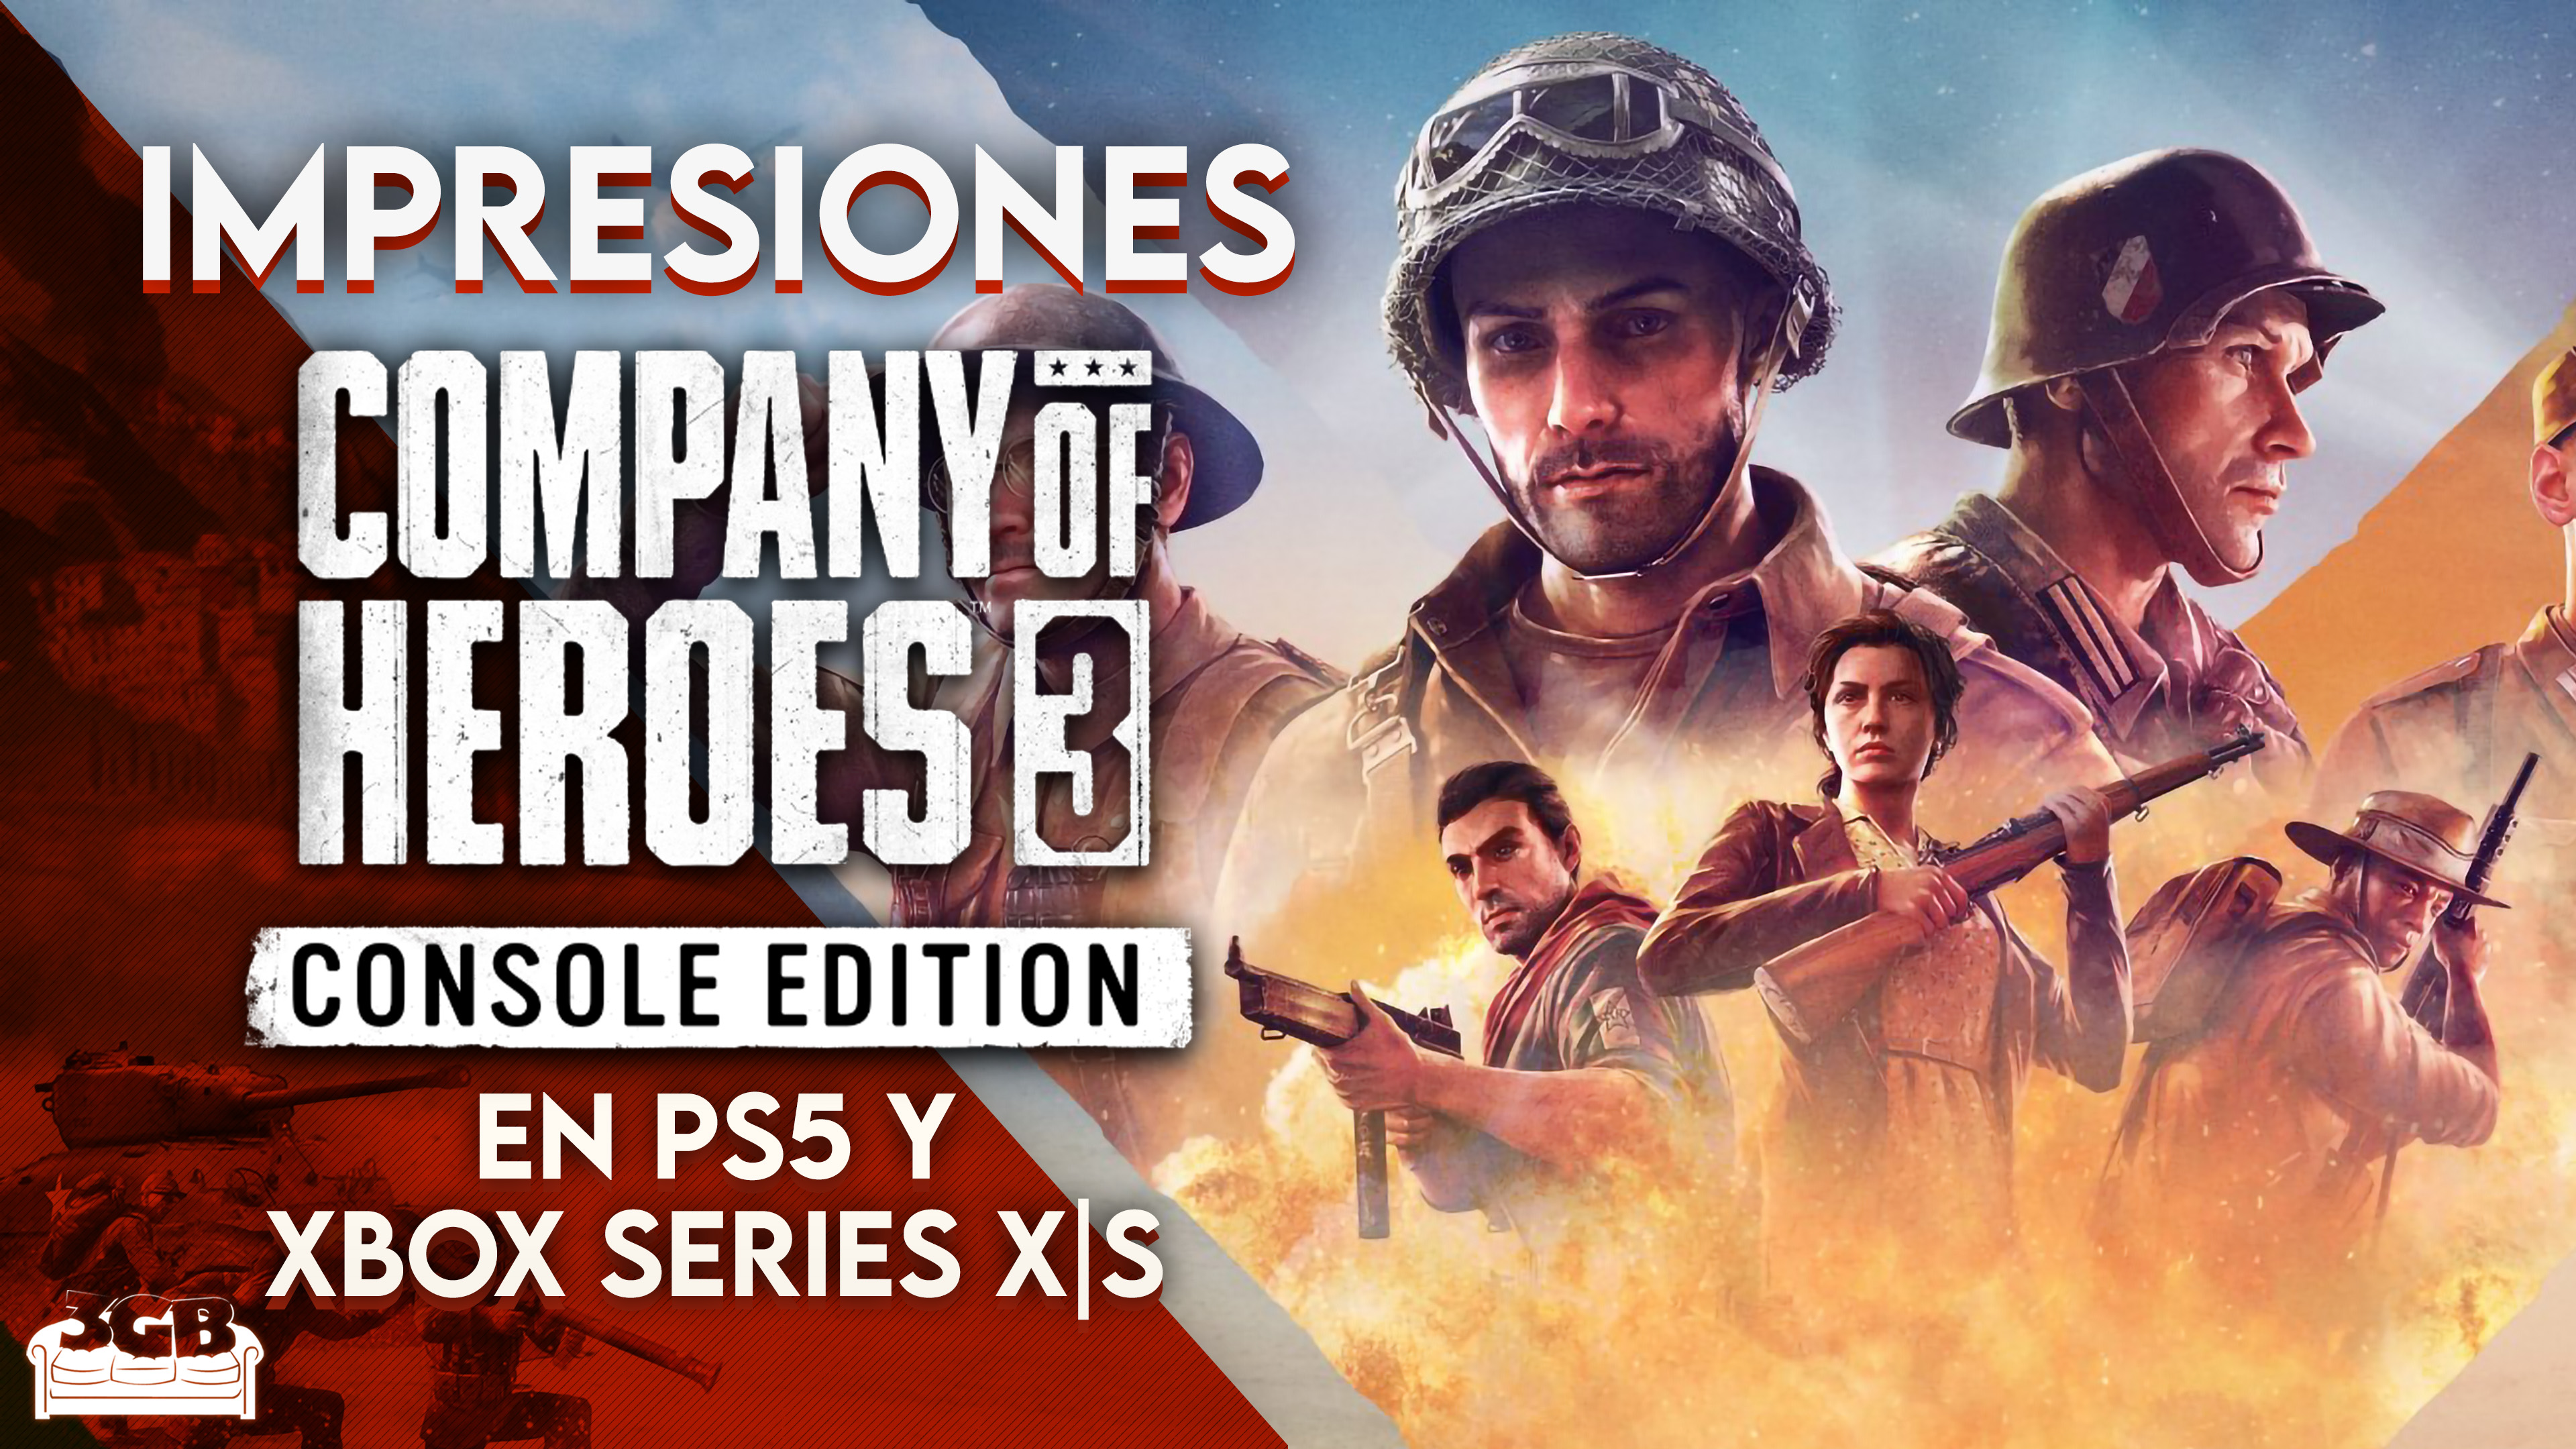 Impresiones Company Of Heroes 3 – Console Edition